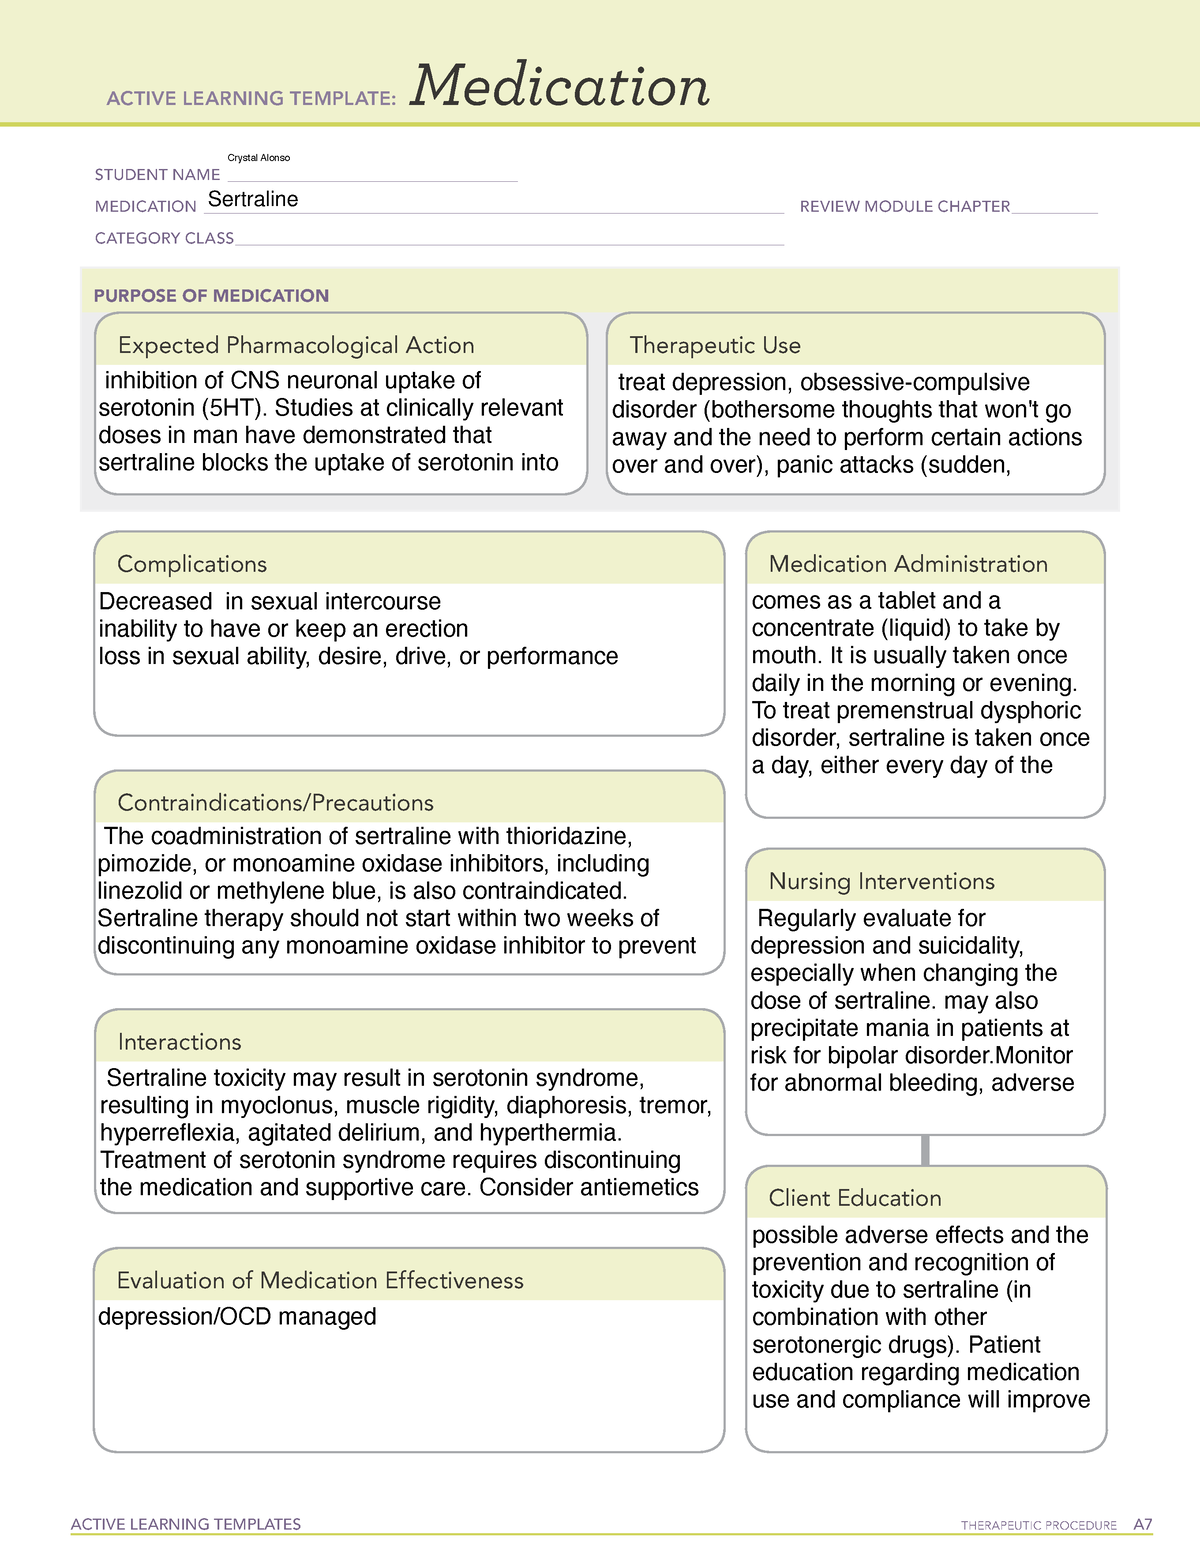 Sertraline Medication template ACTIVE LEARNING TEMPLATES